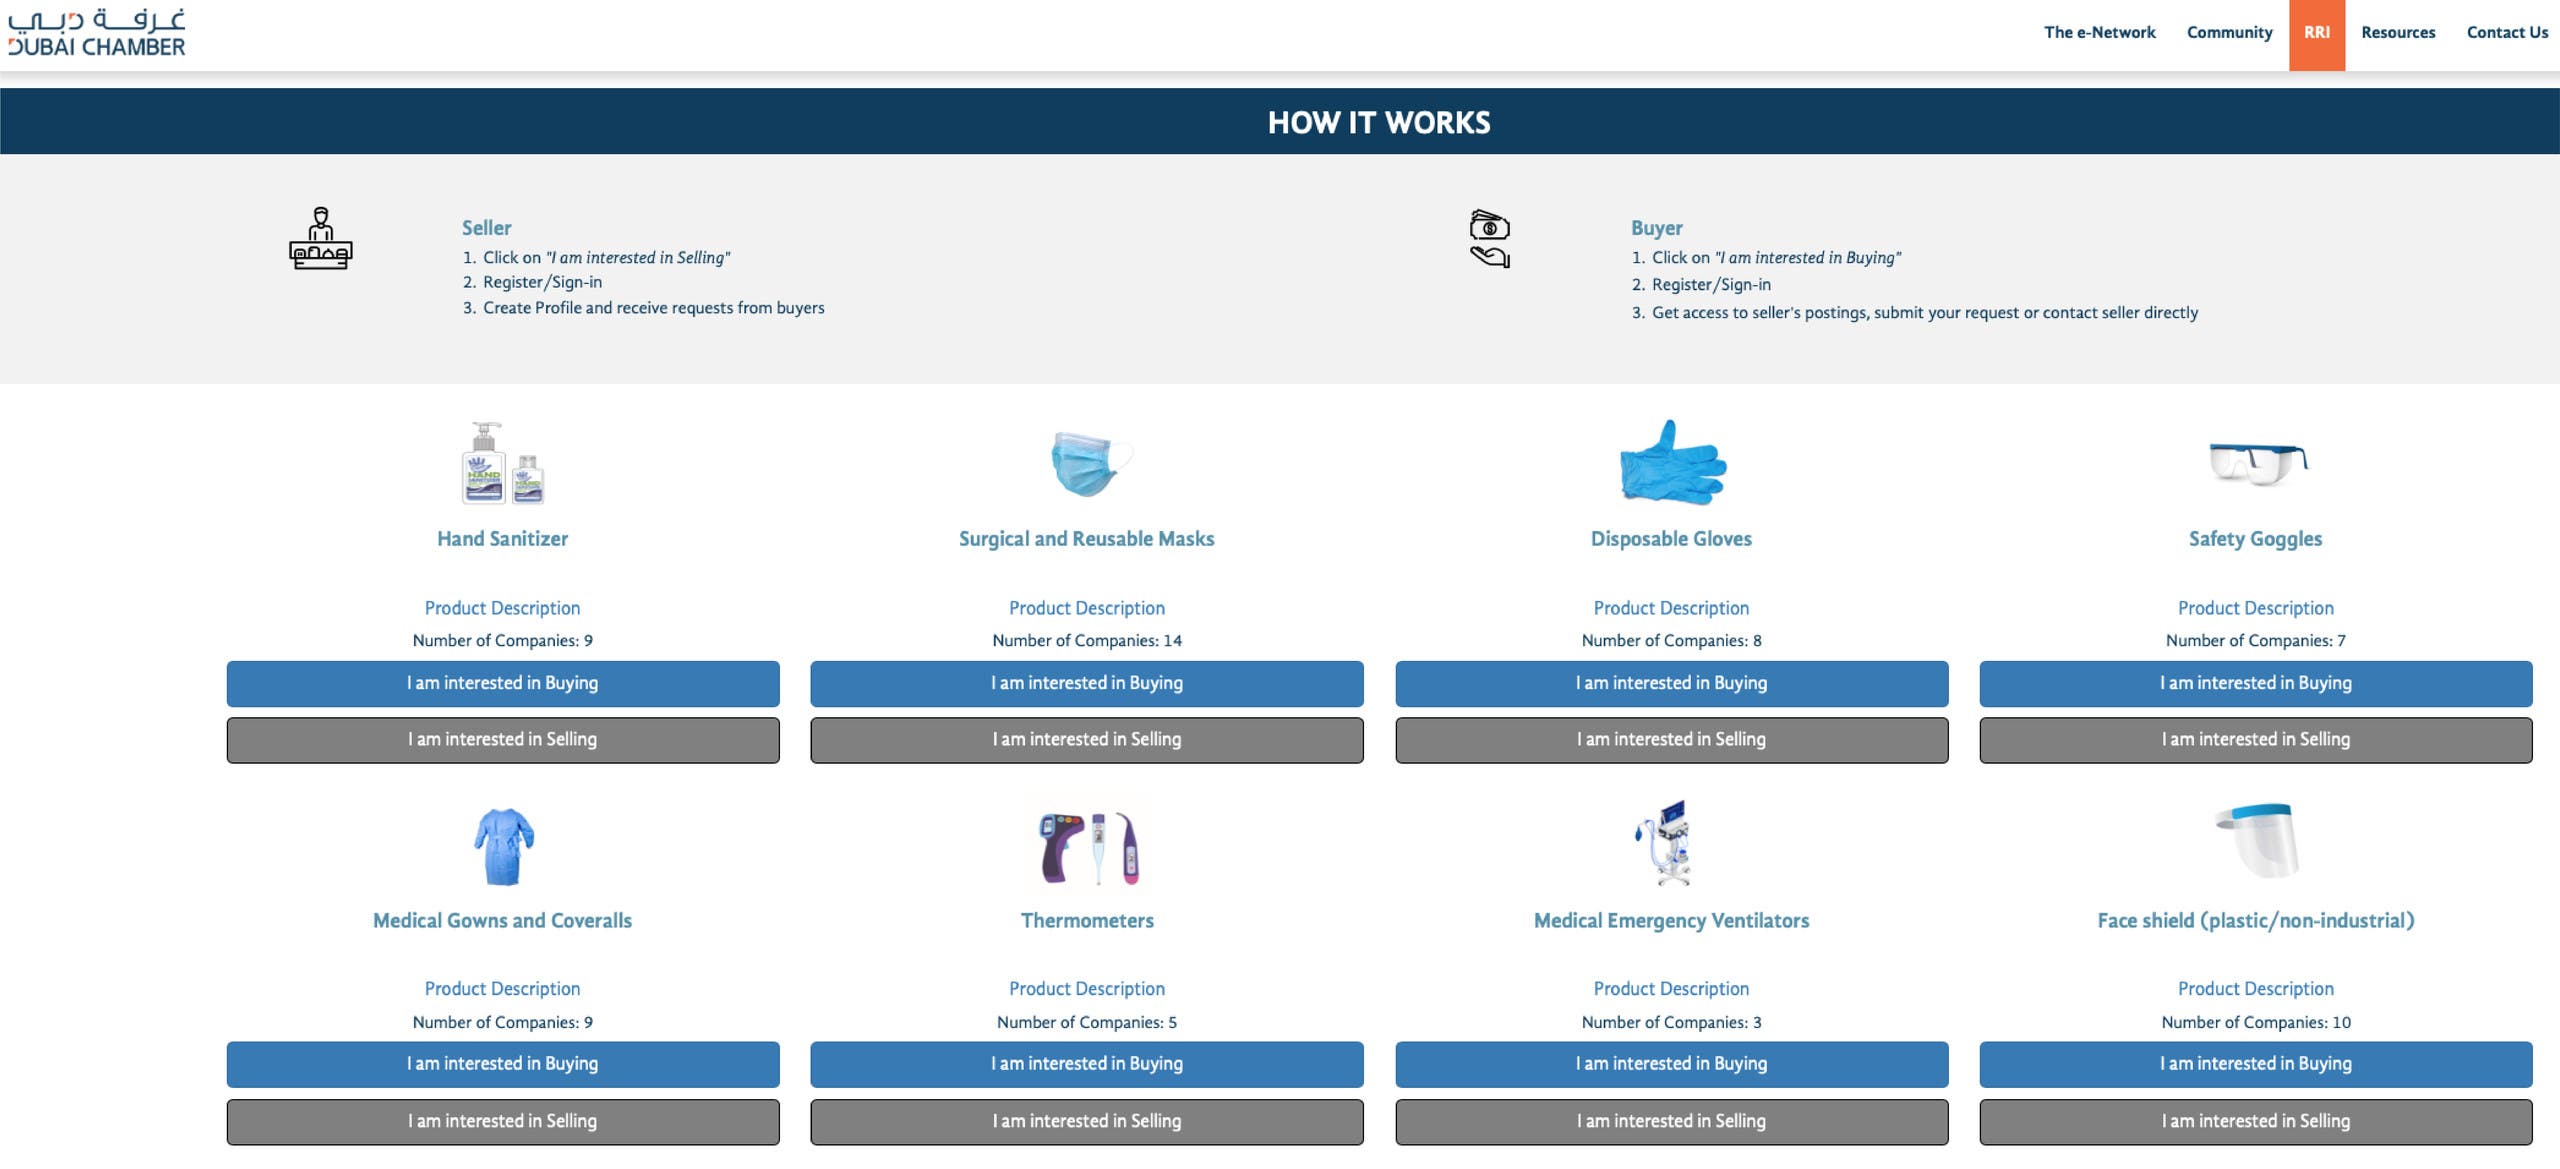 An image of Dubai Chamber's online PPE marketplace.